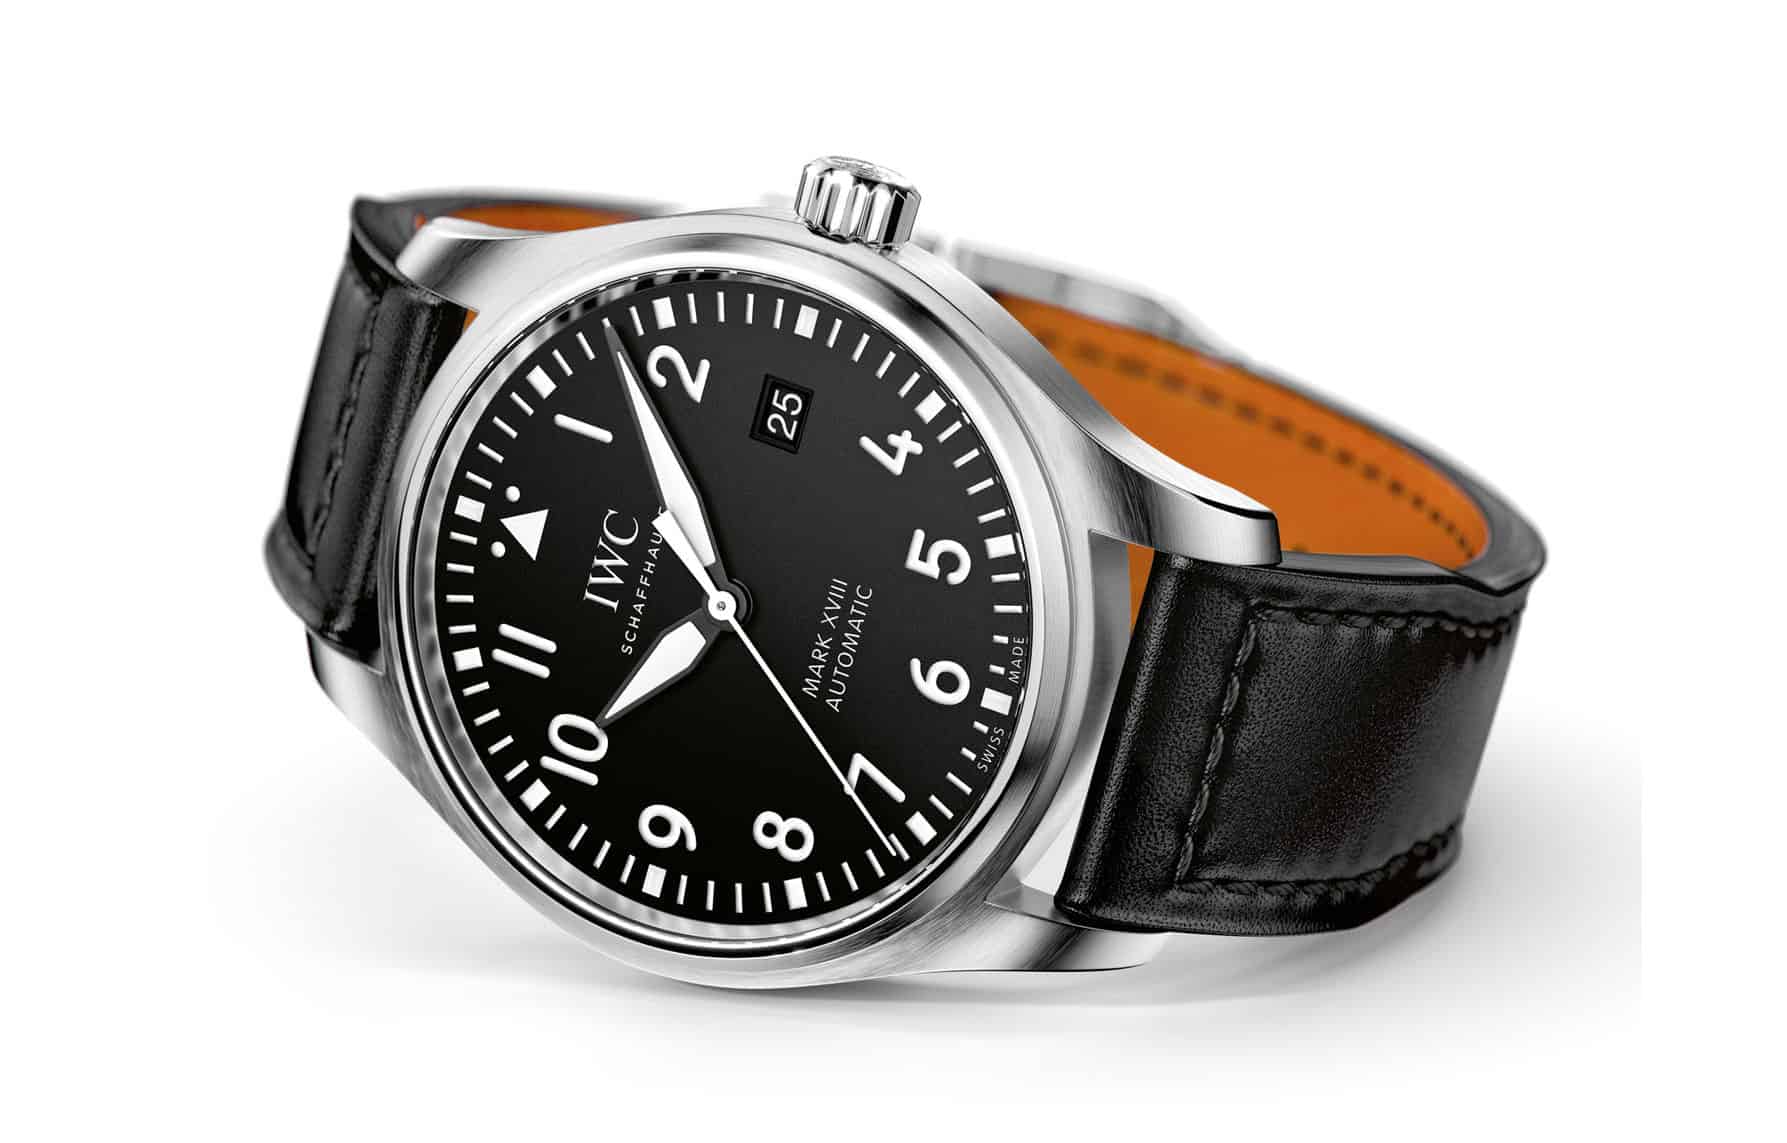 SIHH 2016: An Opinionated Look at IWC 